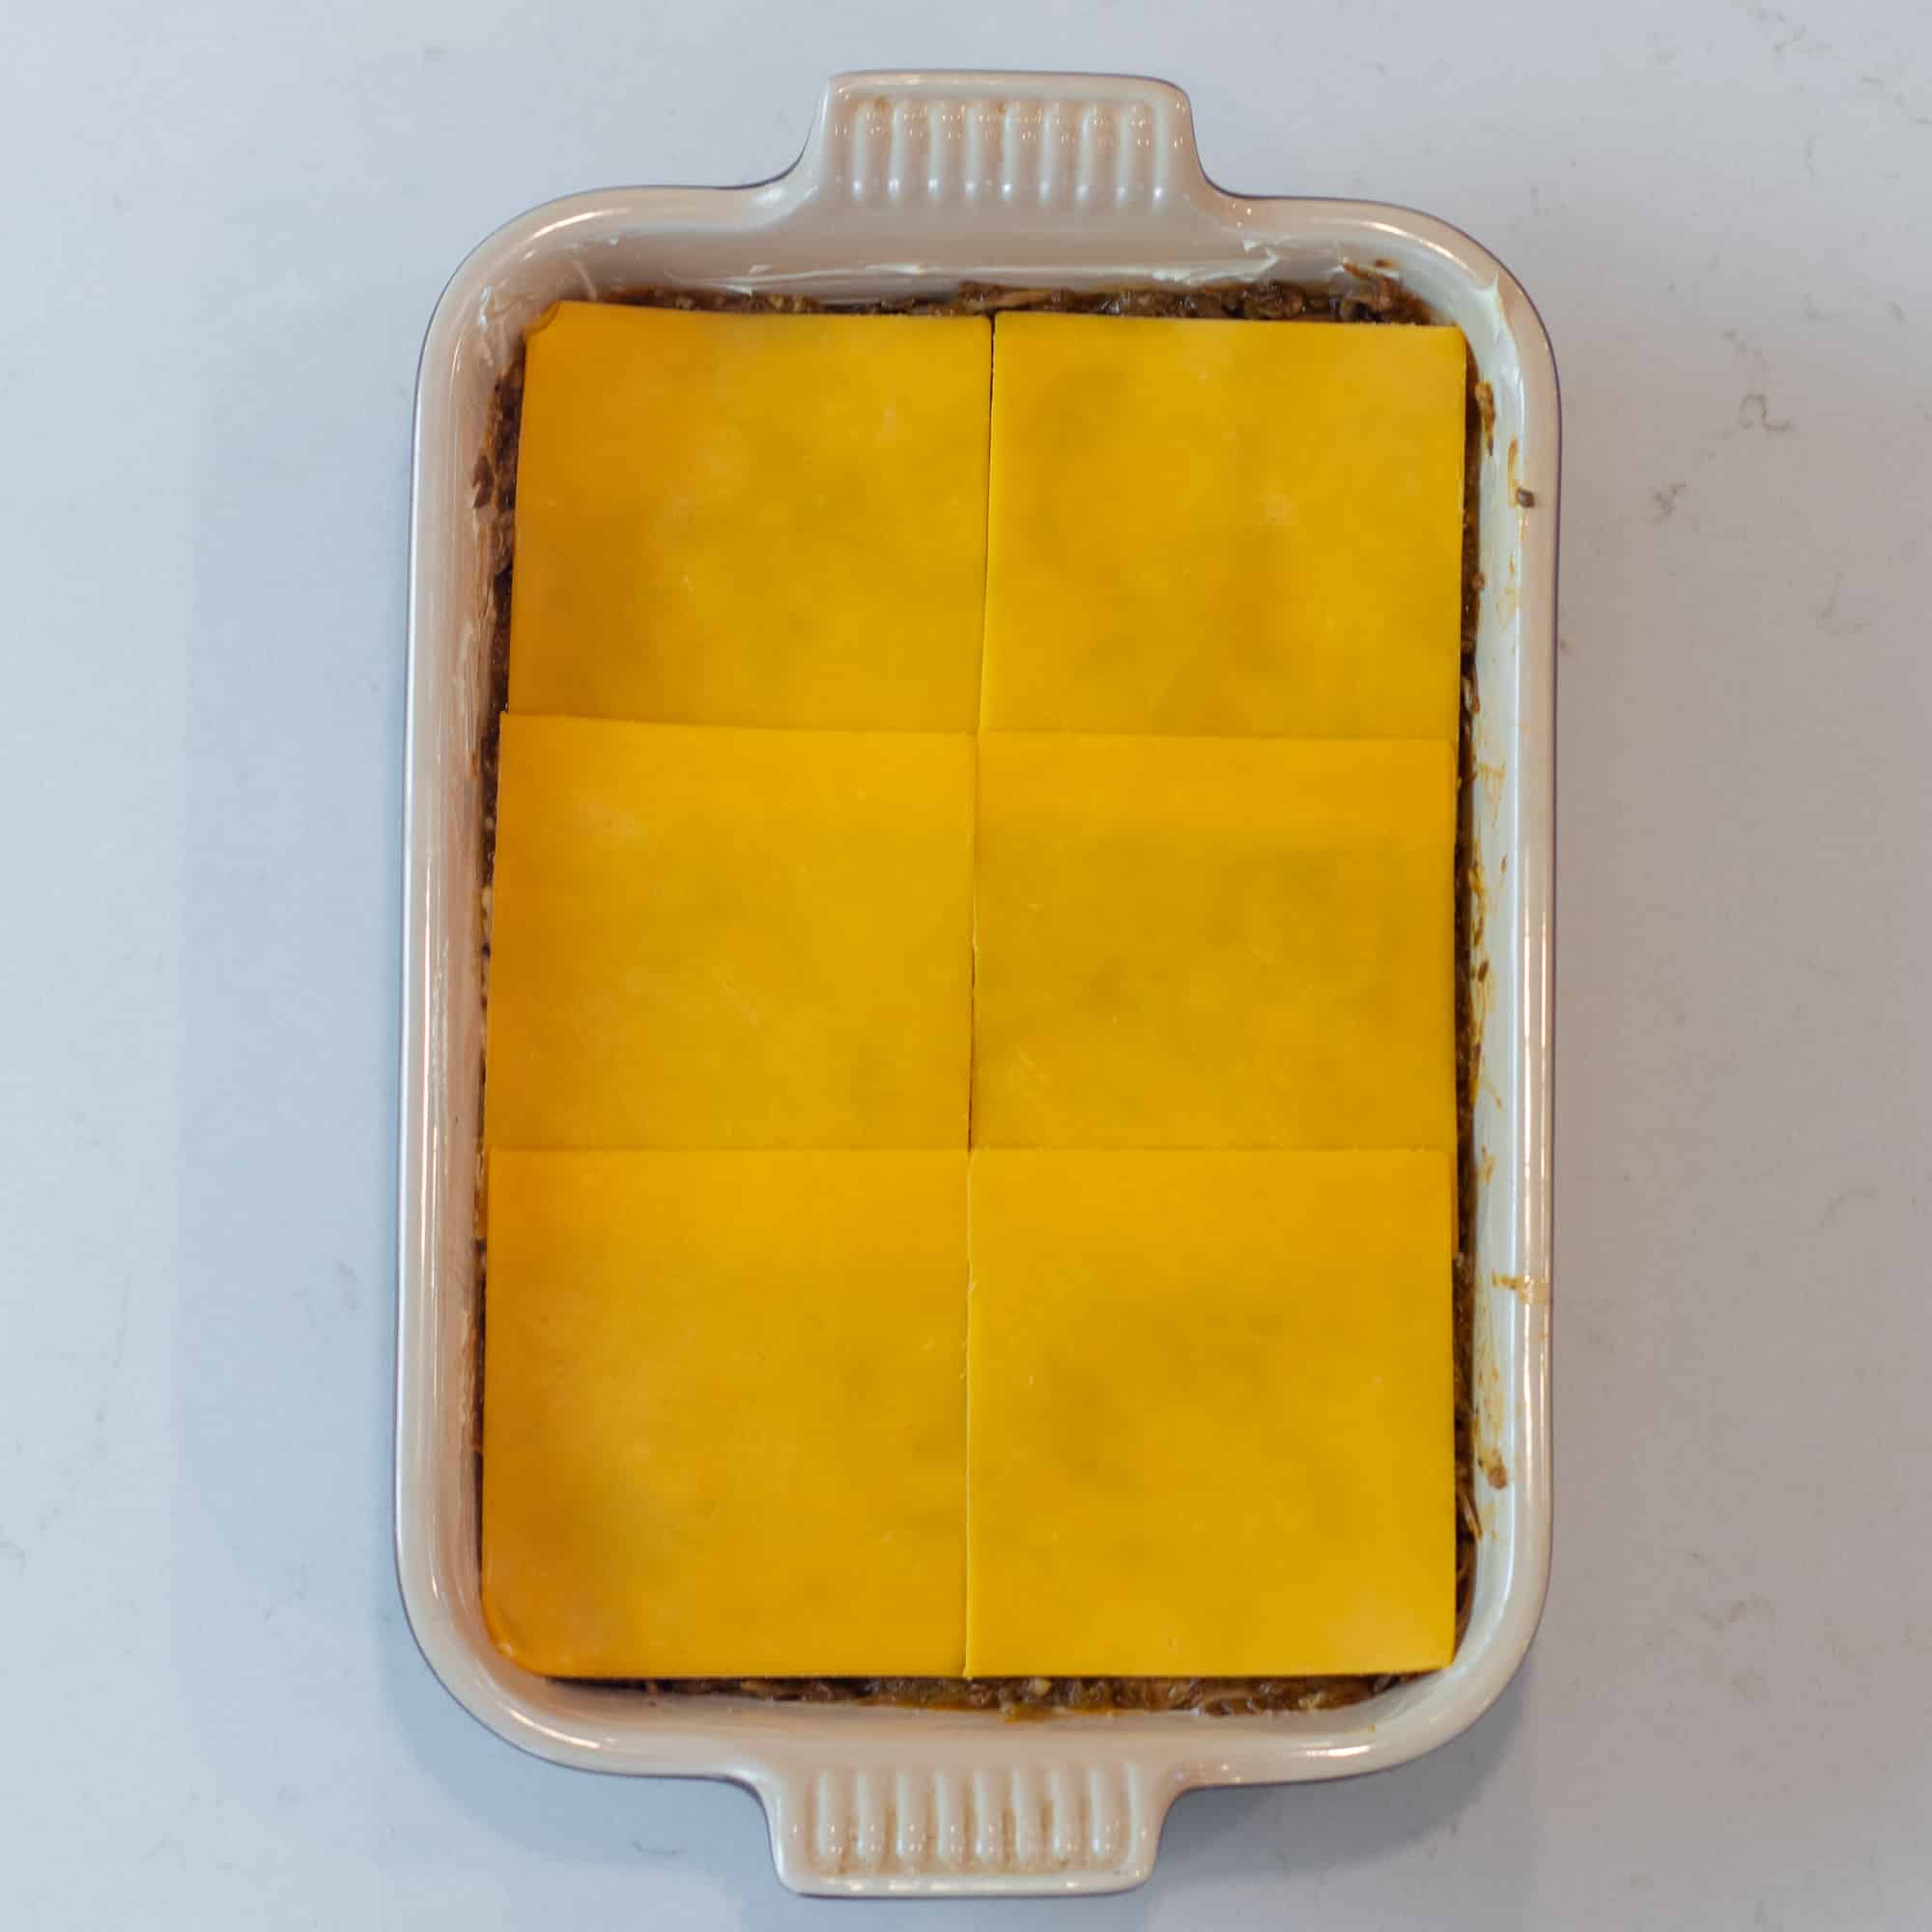 Lay the cheese slices down.